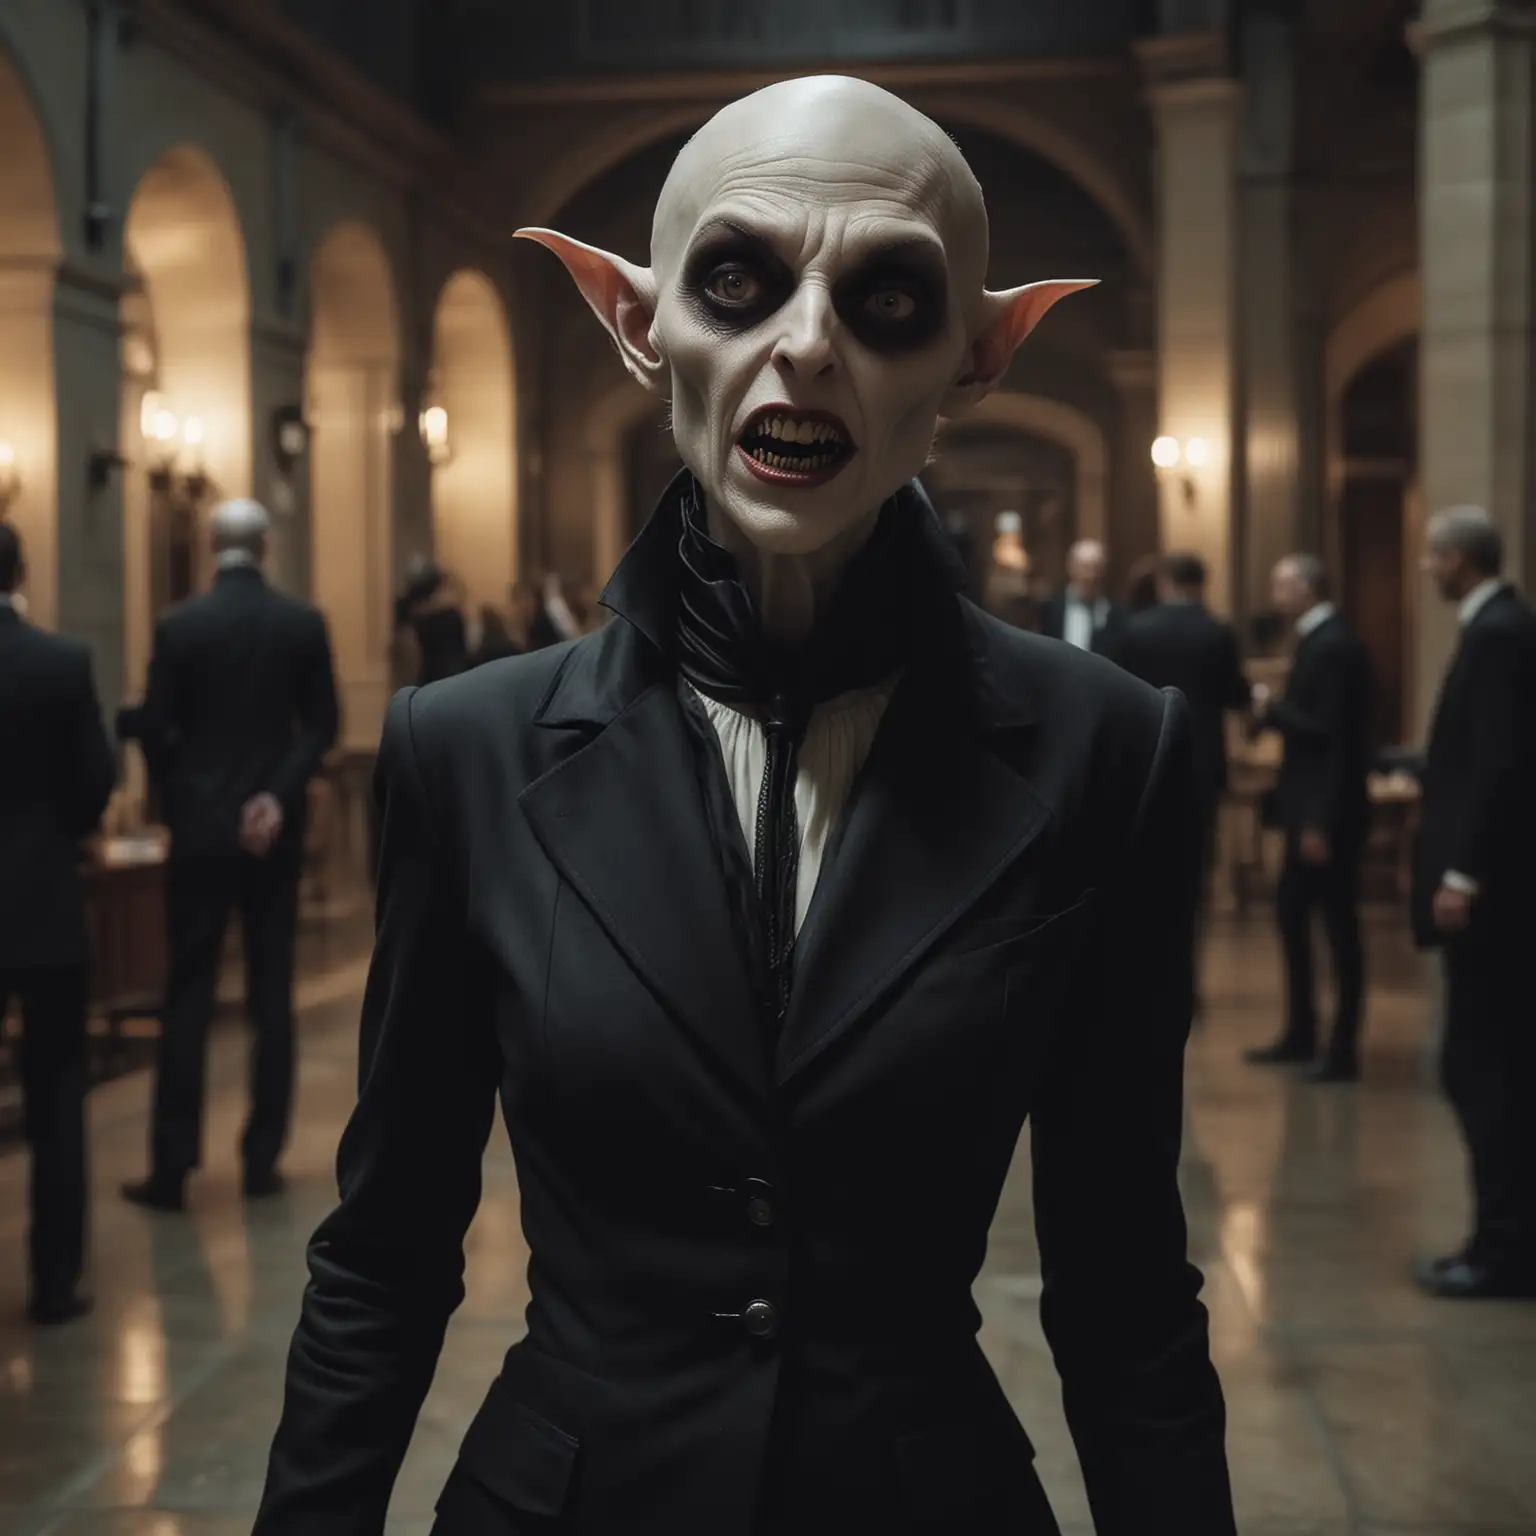 Nosferatu Female in Business Suit Conversing with Vampires in Nighttime Lobby